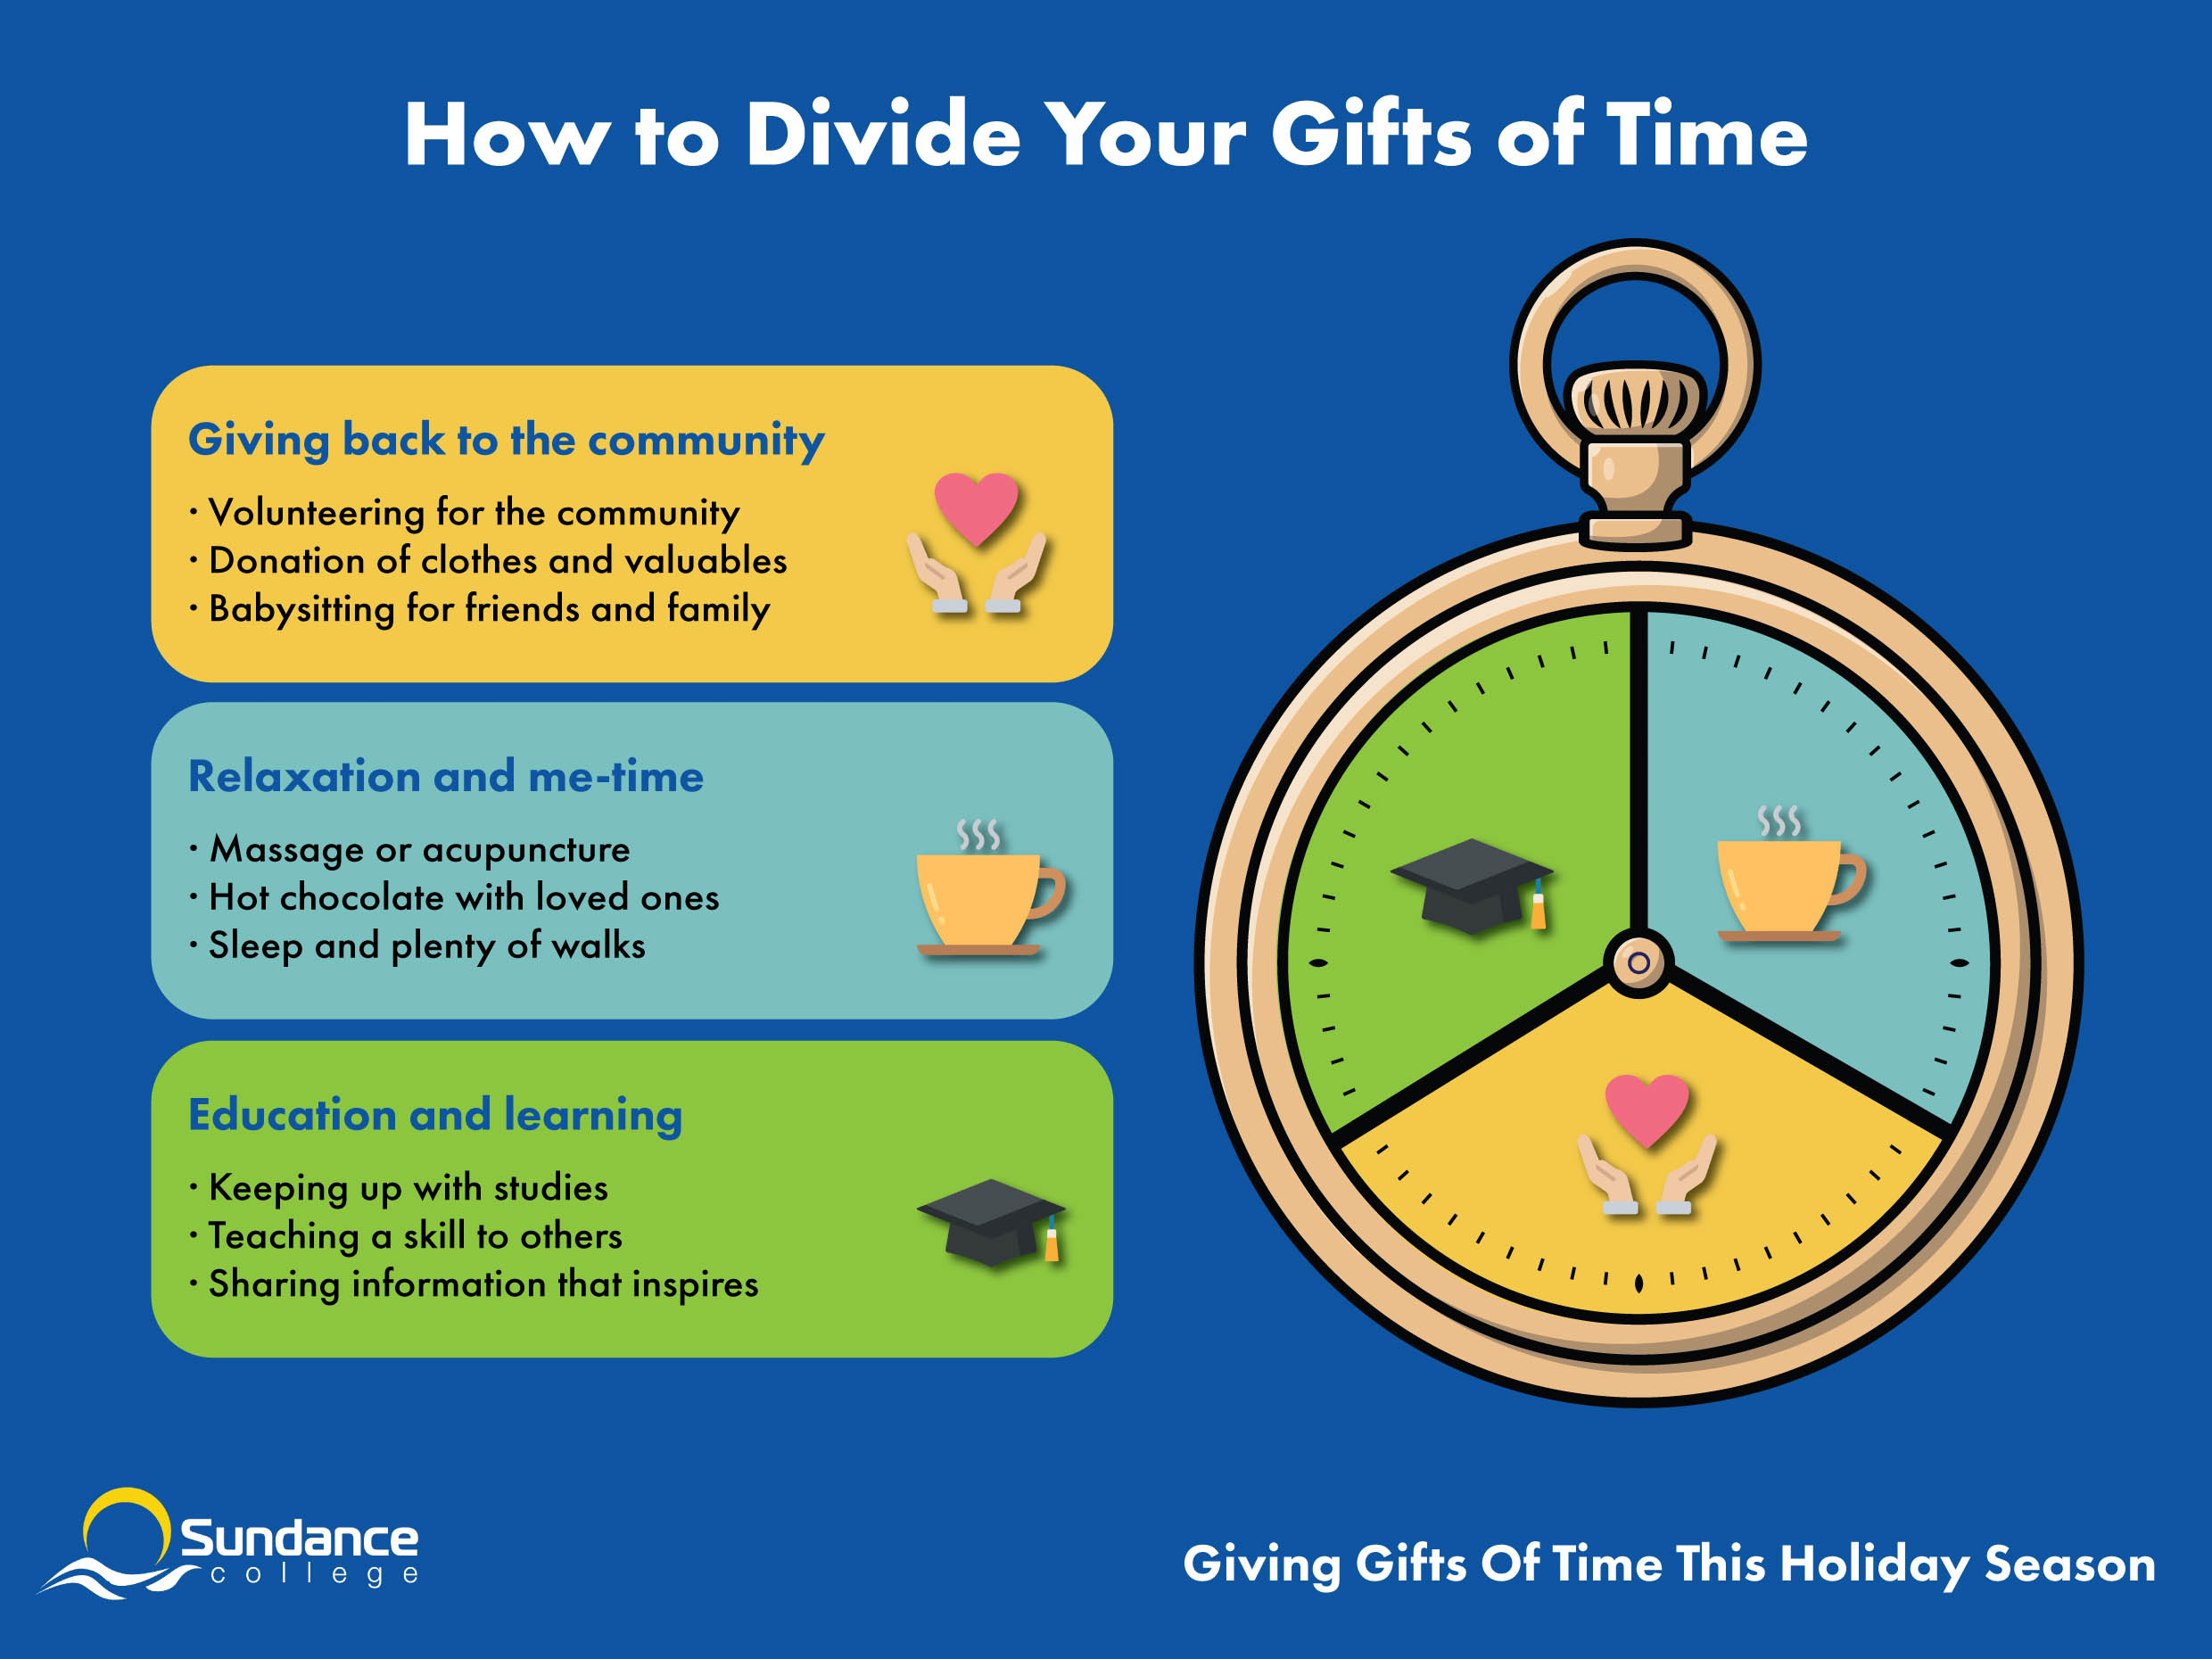 infographic depicting a pocket watch with ideas on how to divide your gifts of time, including; giving back to the community by volunteering, donating, and babysitting; relaxing, including massage or acupuncture, hot chocolate with loved ones, walks, and sleep; and education and learning, including your studies, teaching a skill, and sharing inspiring information.